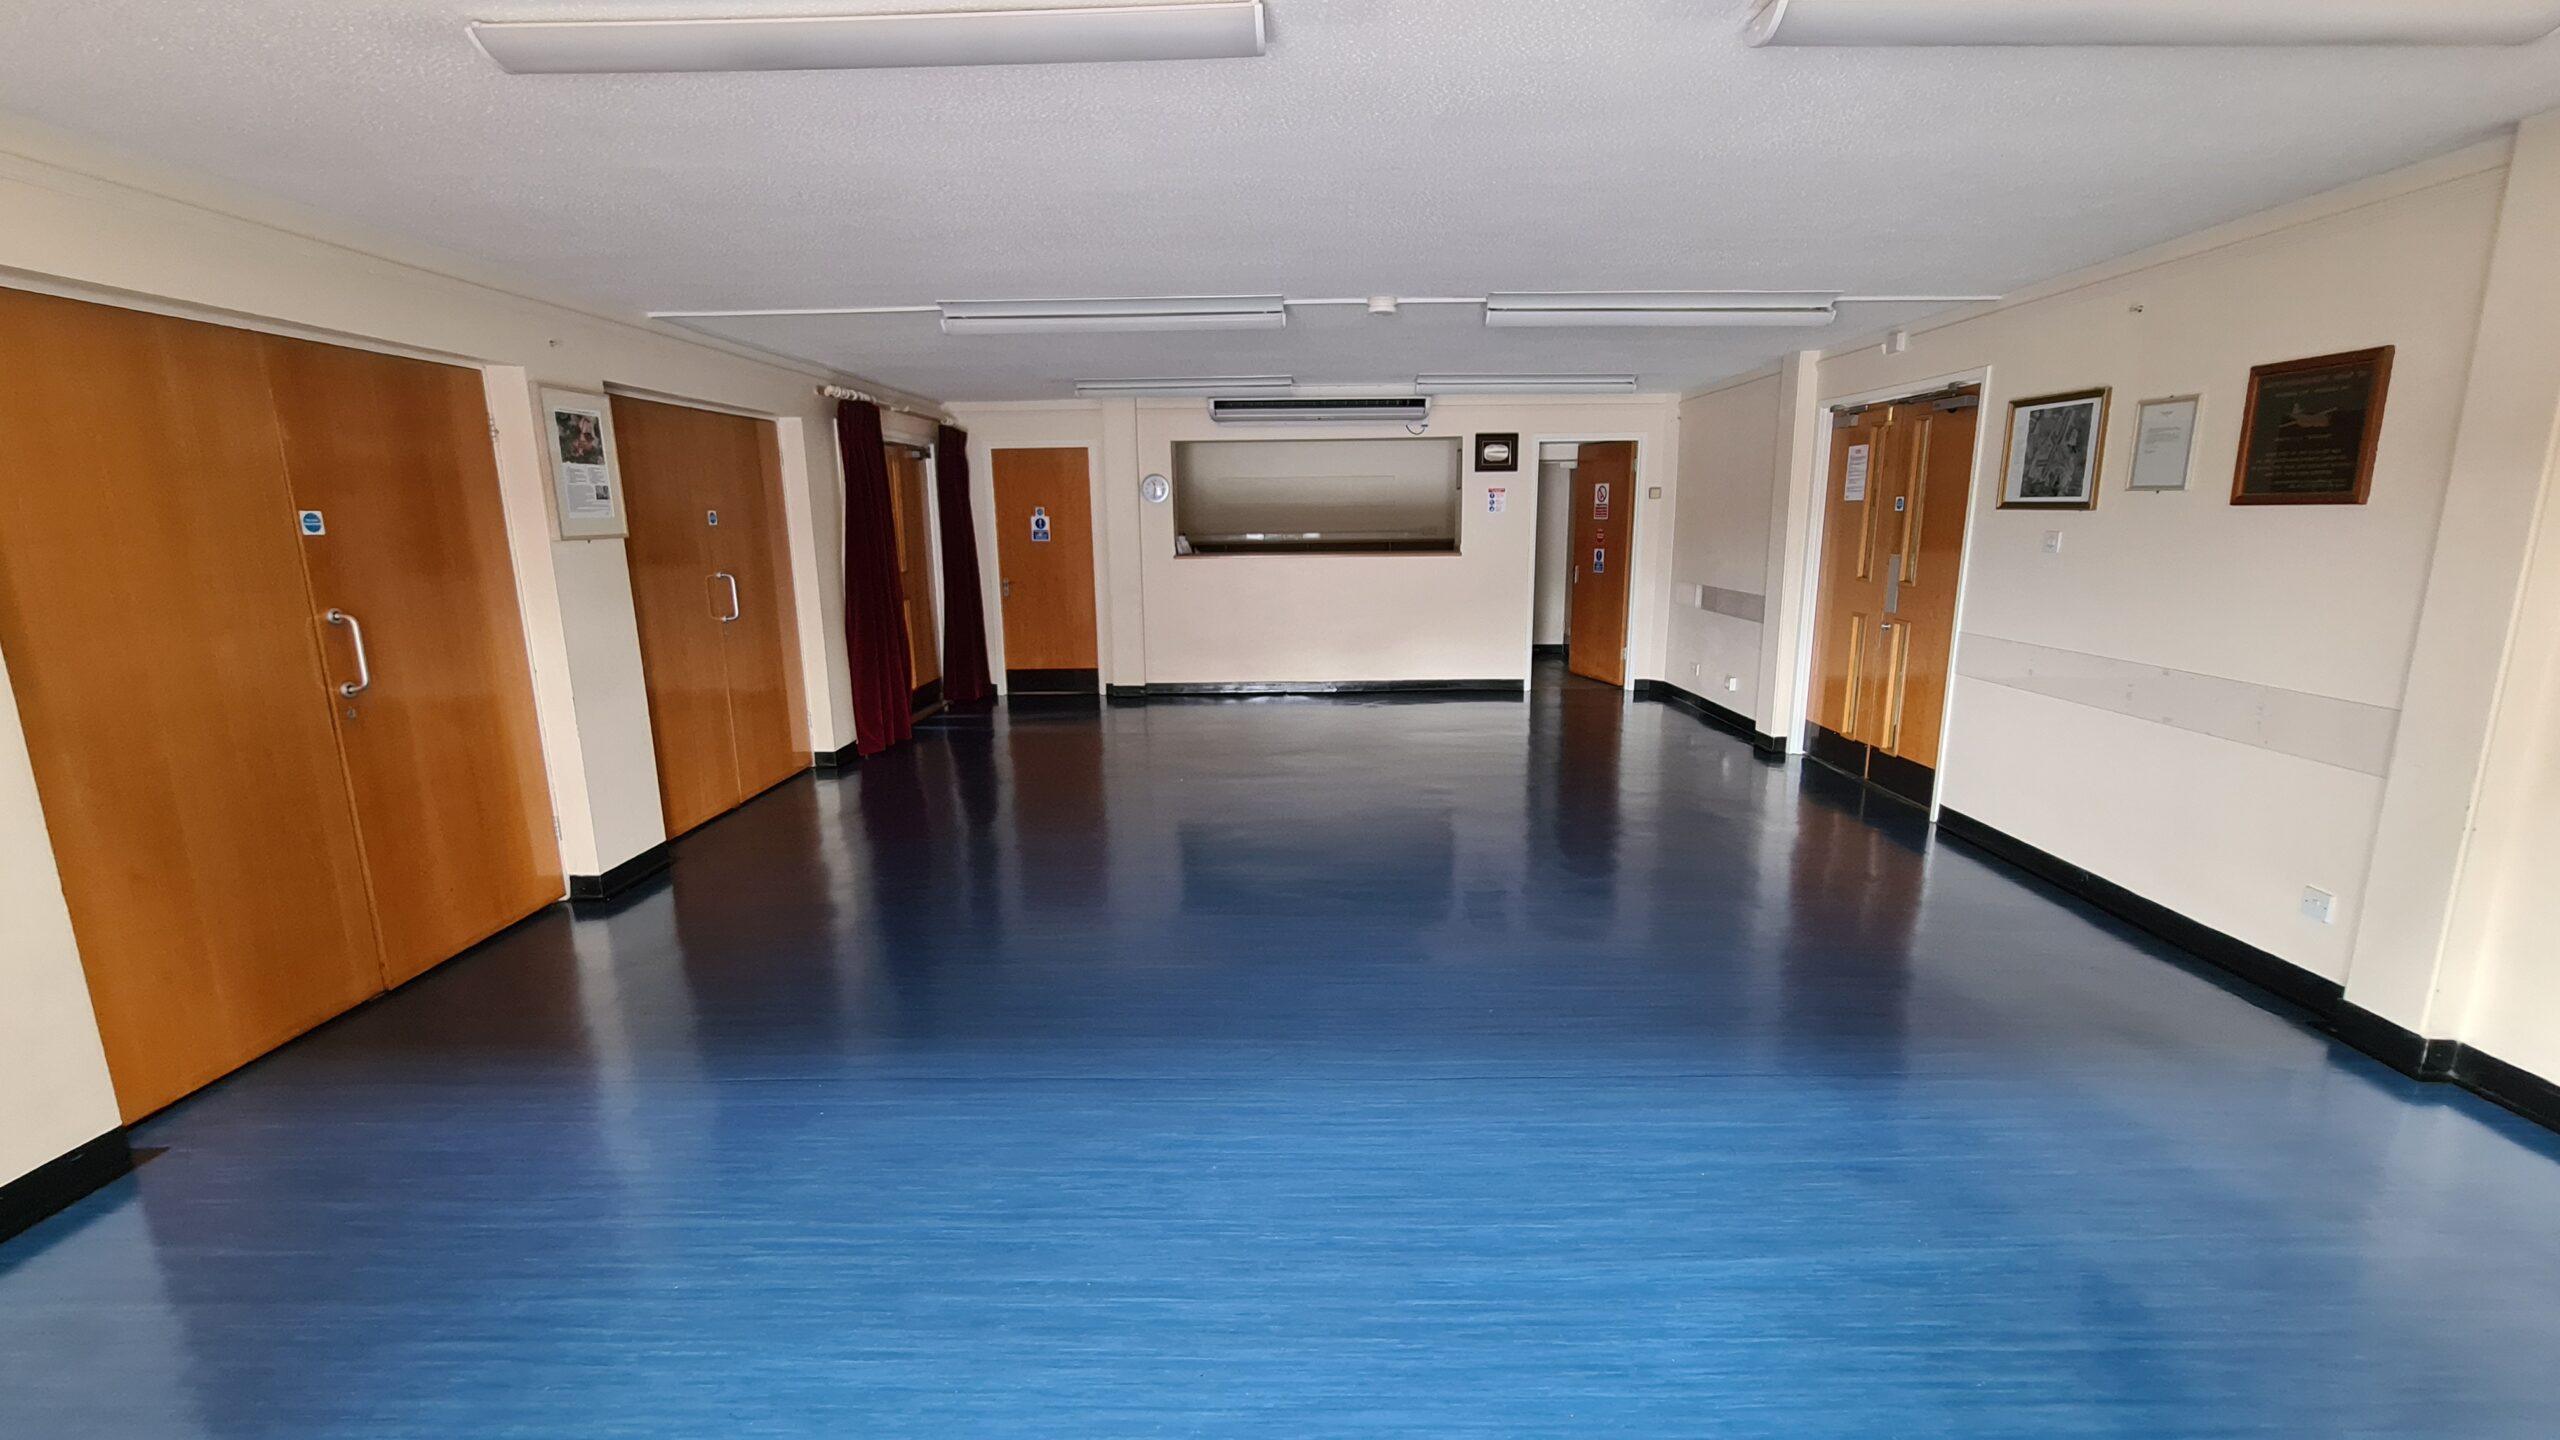 Photo of the Club Room from fire exit